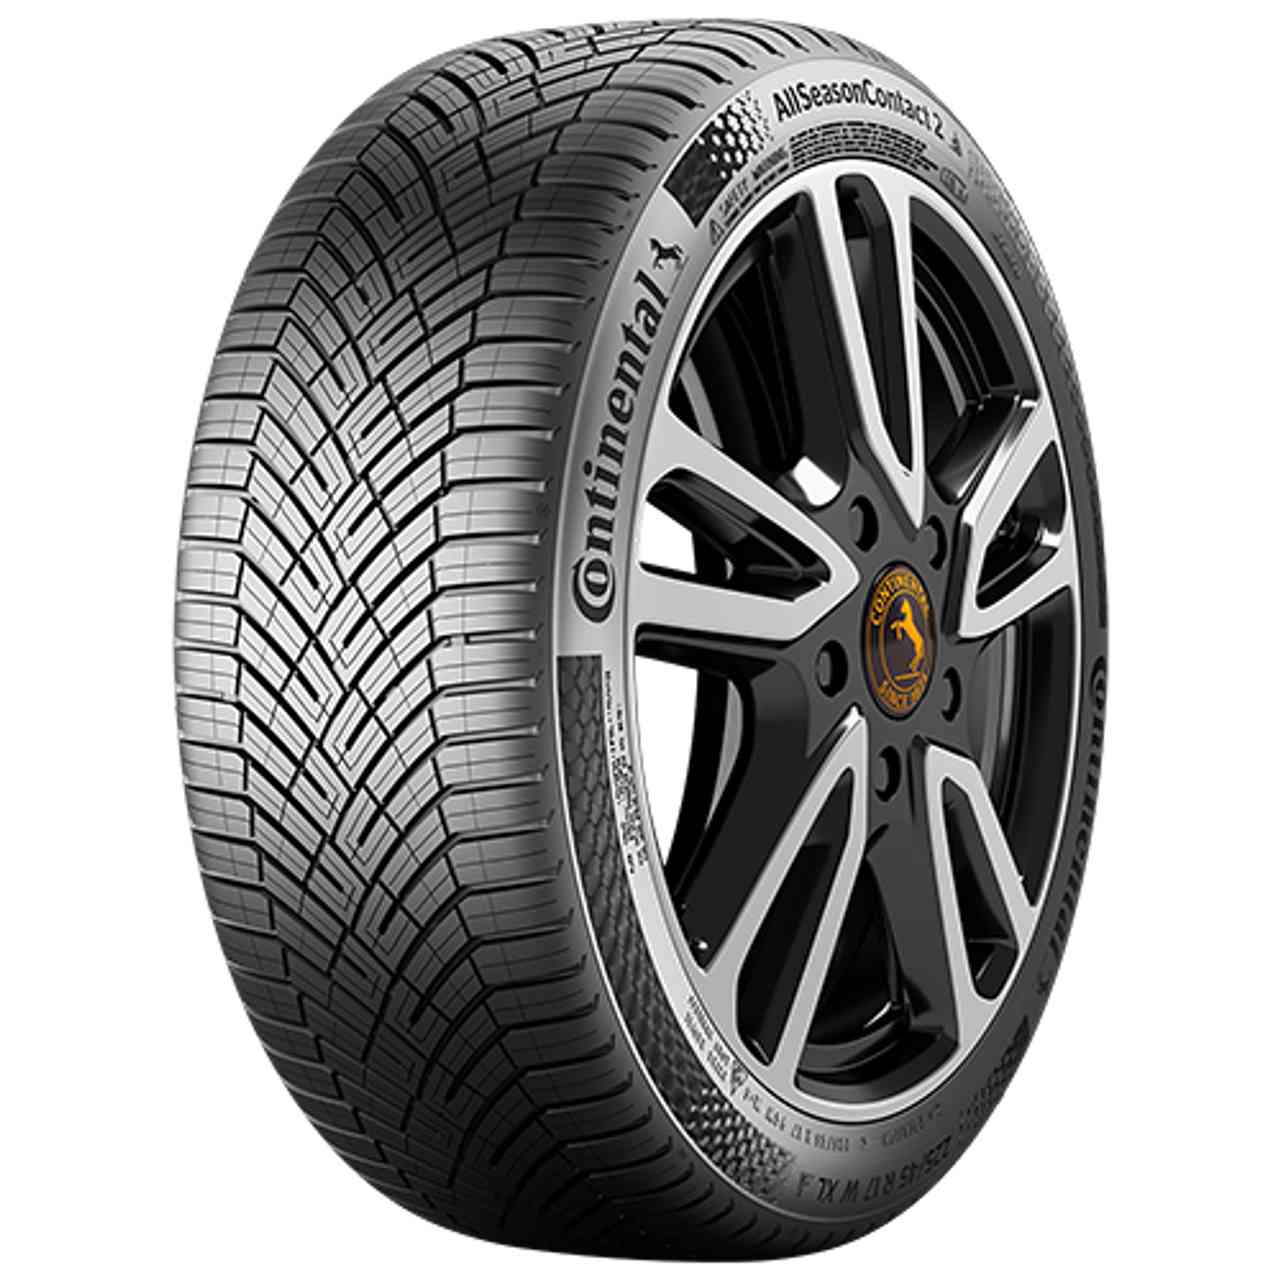 CONTINENTAL ALLSEASONCONTACT 2 (EVc) 255/50R19 103T FR BSW